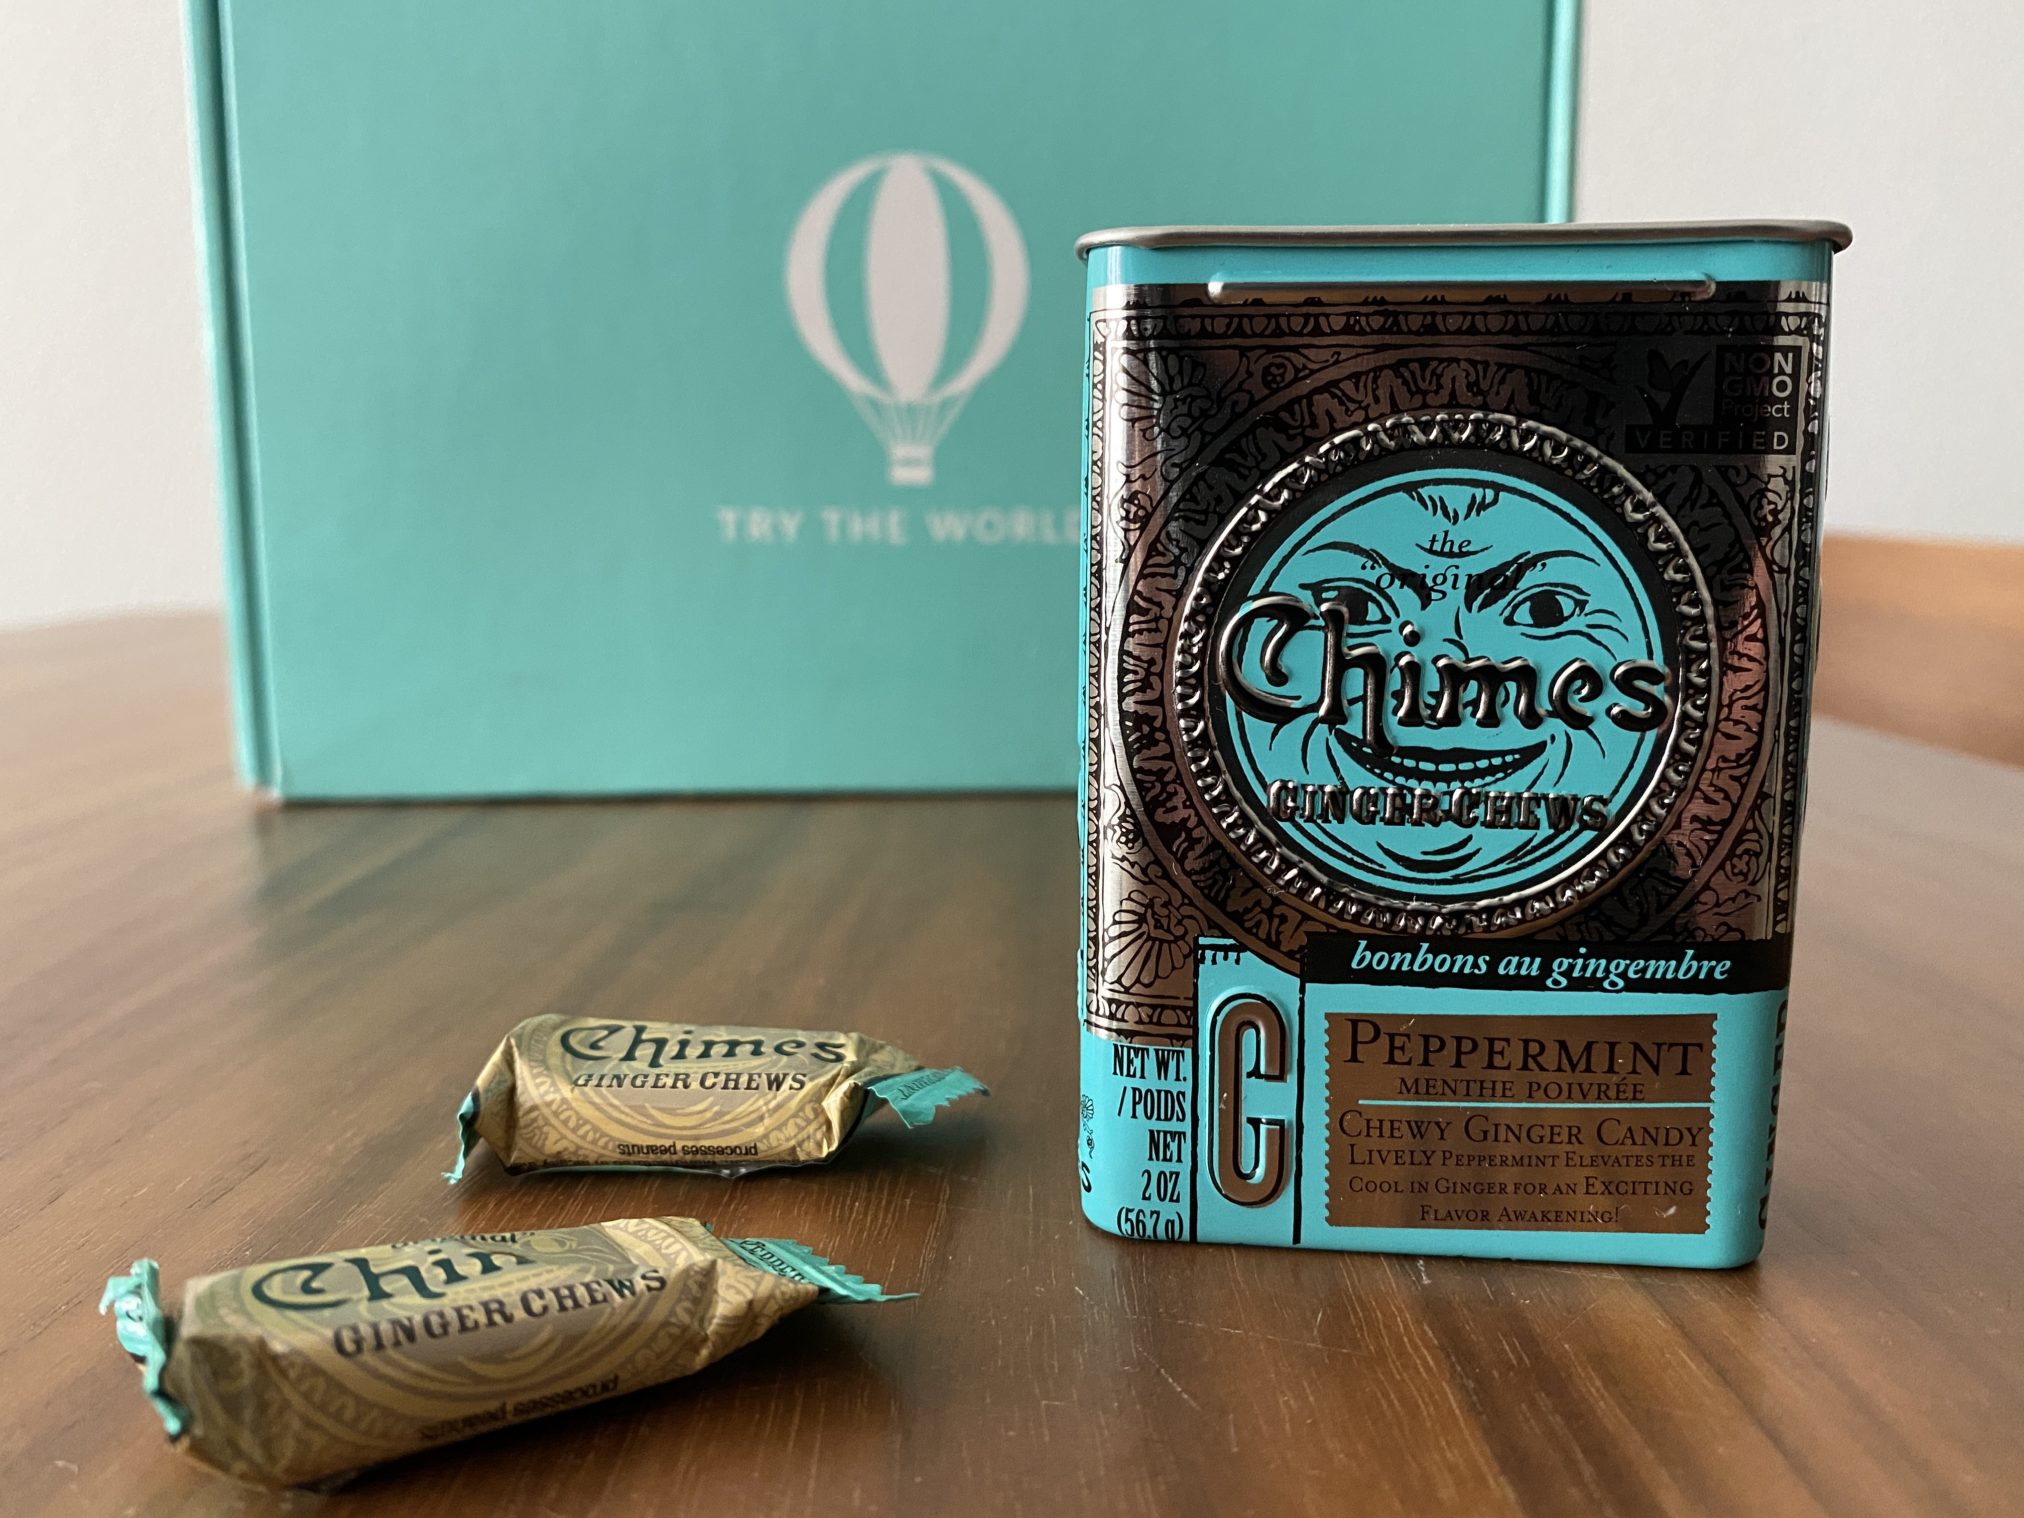 Chimes Ginger Chews - Try The World Review - Is It Worth It? - SubscriptionBoxExpert